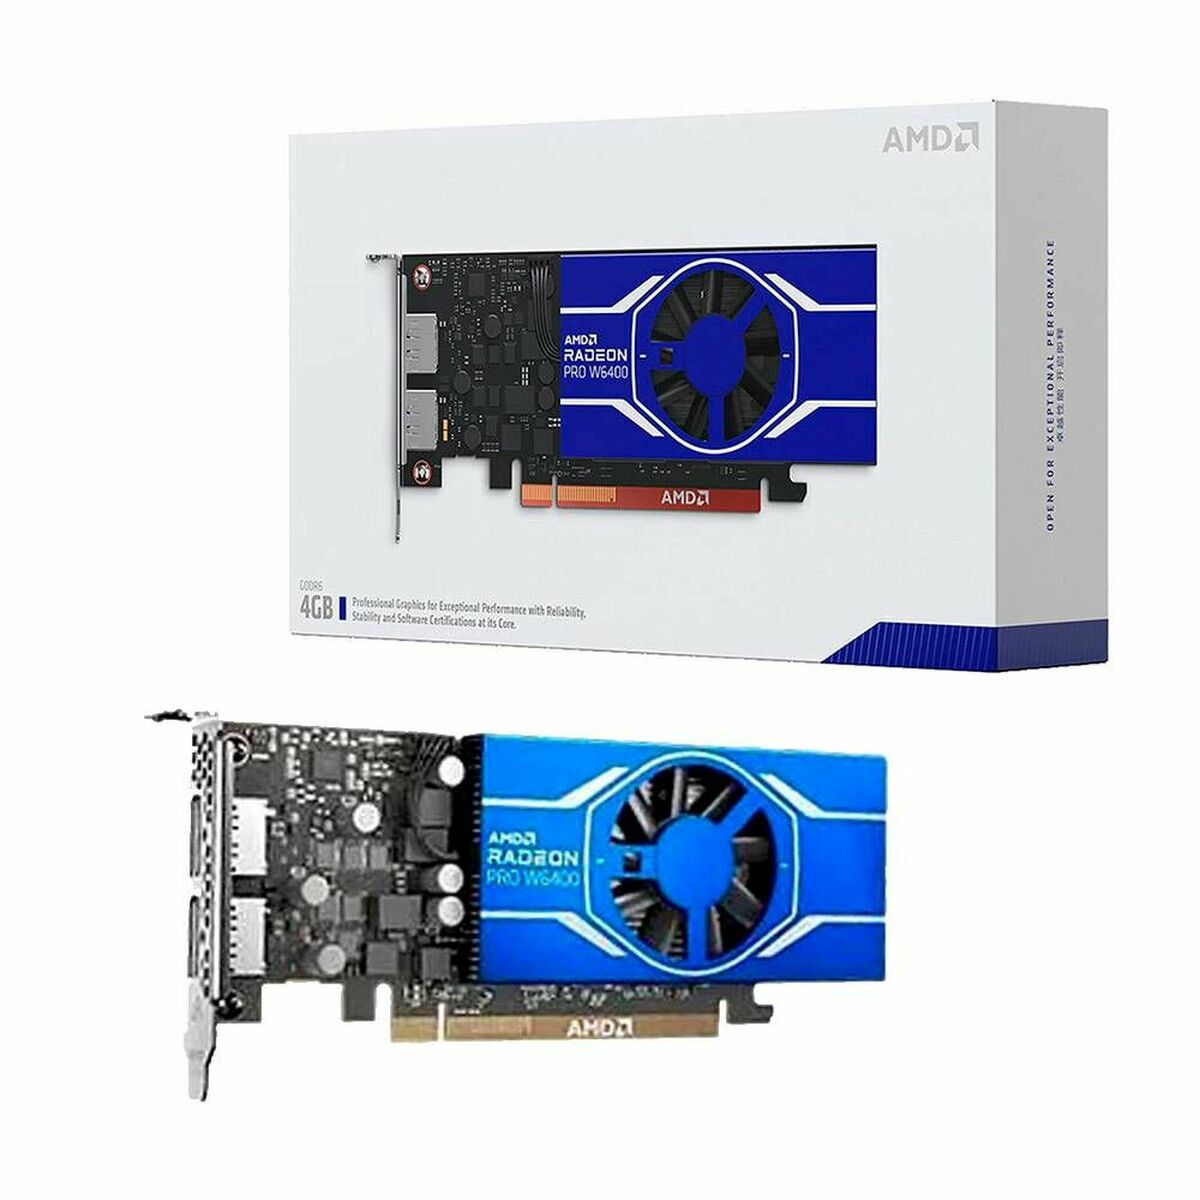 Gaming Graphics Card AMD 100-506189 4 GB GDDR6, AMD, Computing, Components, gaming-graphics-card-amd-100-506189-4-gb-gddr6, Brand_AMD, category-reference-2609, category-reference-2803, category-reference-2812, category-reference-t-19685, category-reference-t-19912, category-reference-t-21360, category-reference-t-25665, computers / components, Condition_NEW, Price_200 - 300, Teleworking, RiotNook